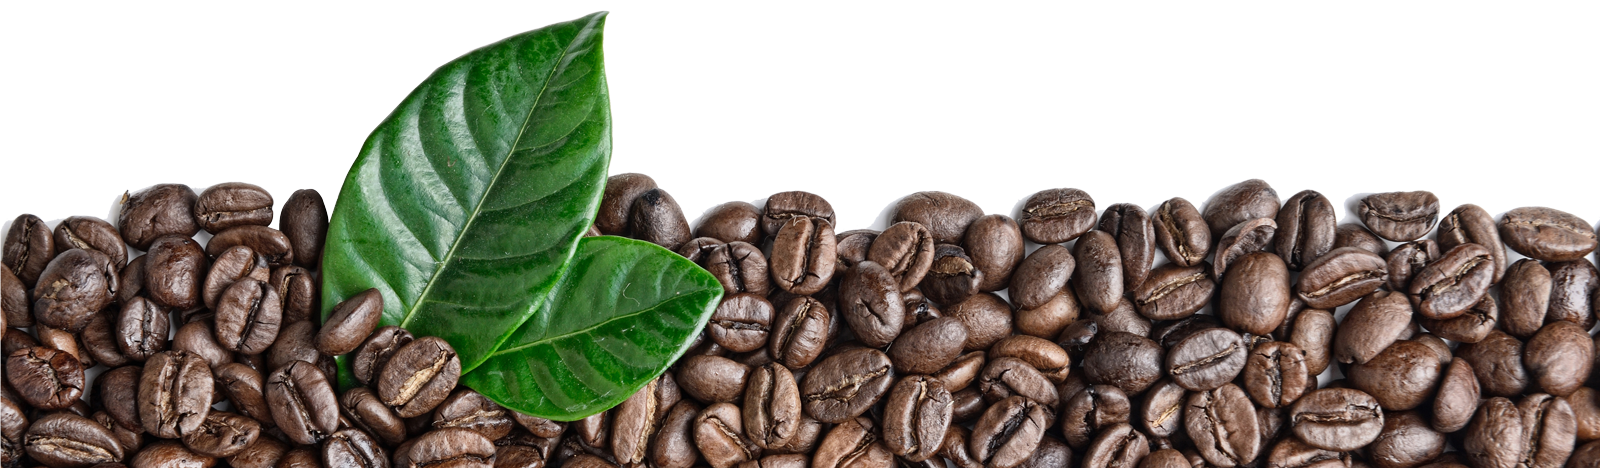 Coffee Beans Leaves PNG Images Transparent Background | PNG Play